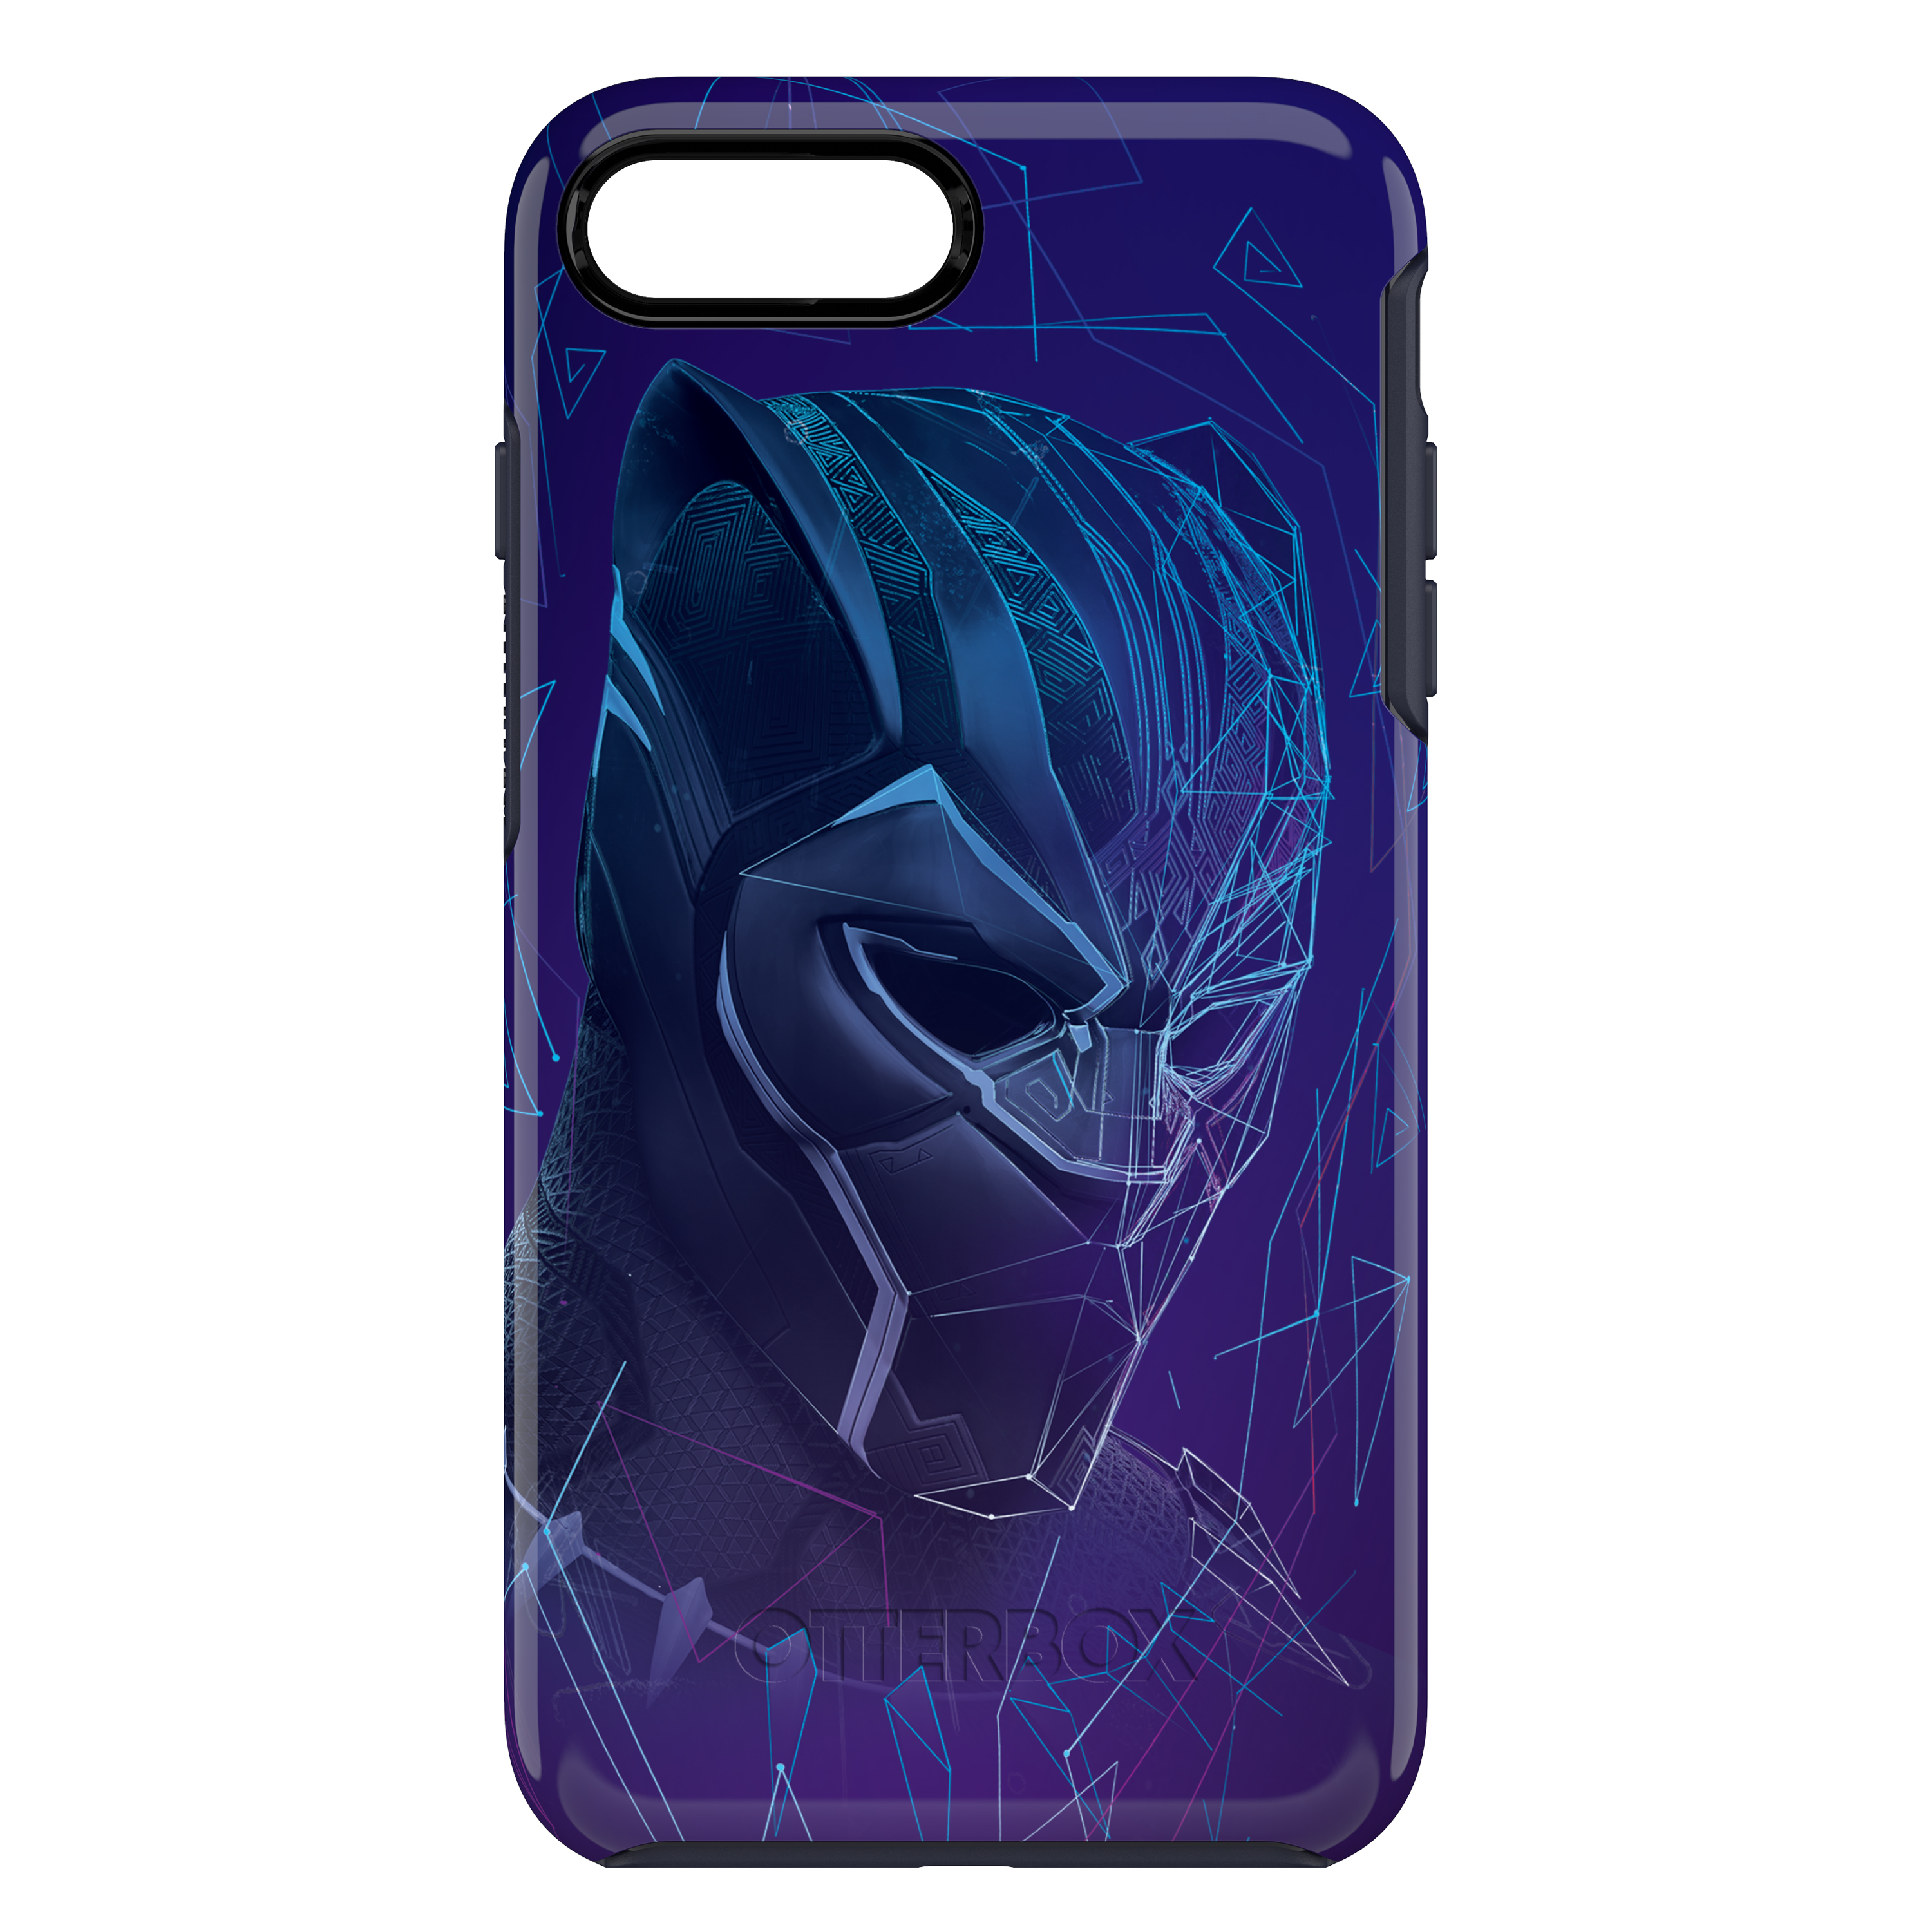 Otterbox Apple Symmetry Case for iPhone 8 Plus/7 Plus, Black Panther - image 4 of 10